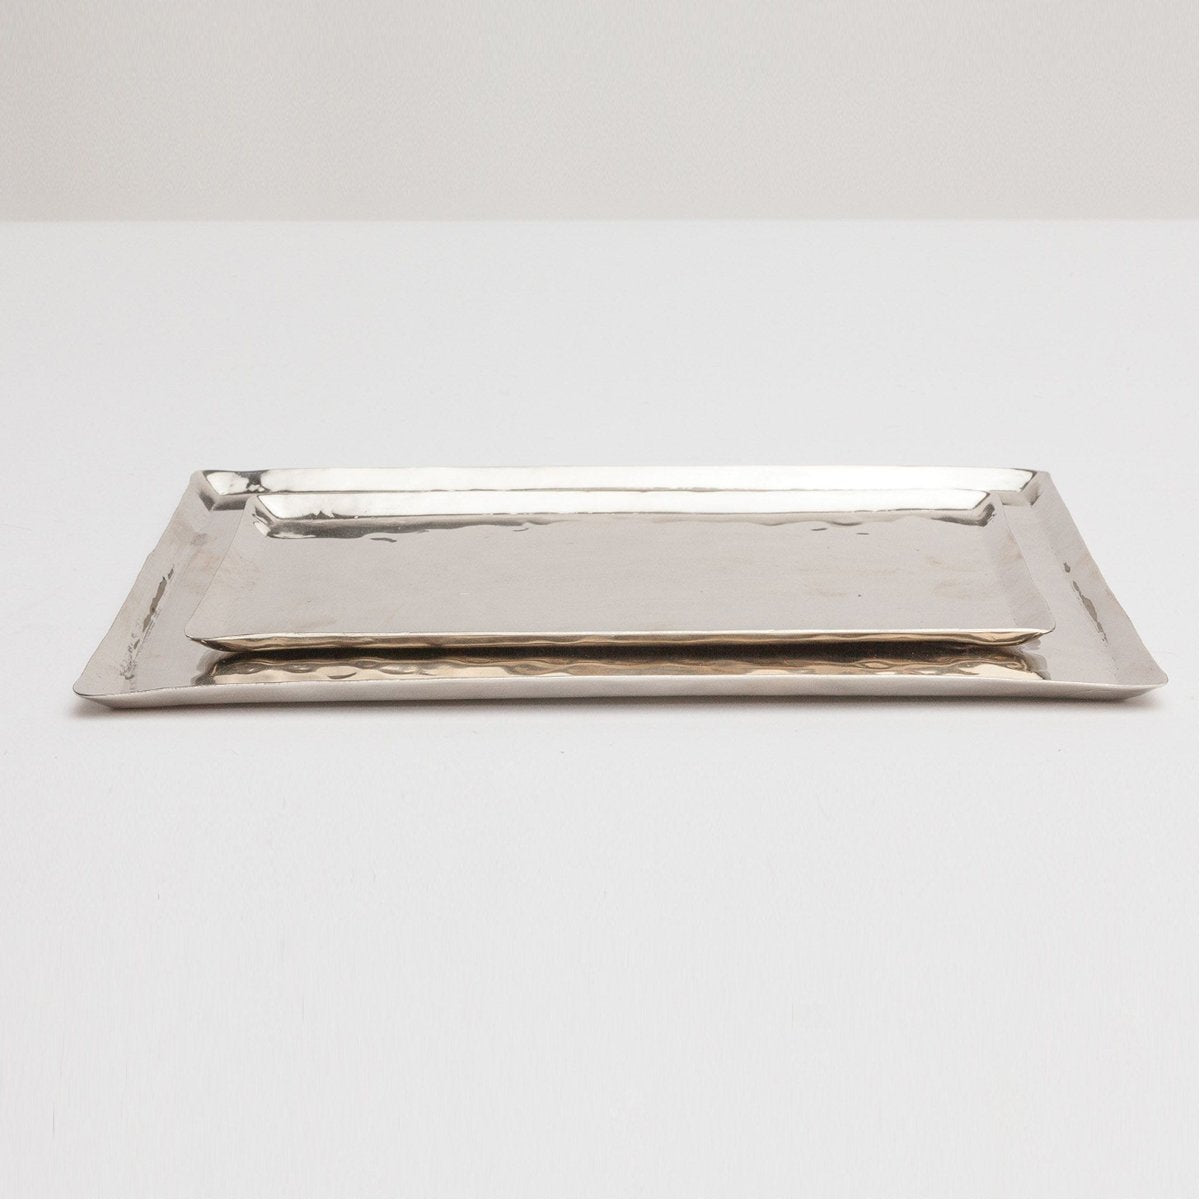 Pigeon and Poodle Stanford Hammered Metal Tray, 2-Piece Set